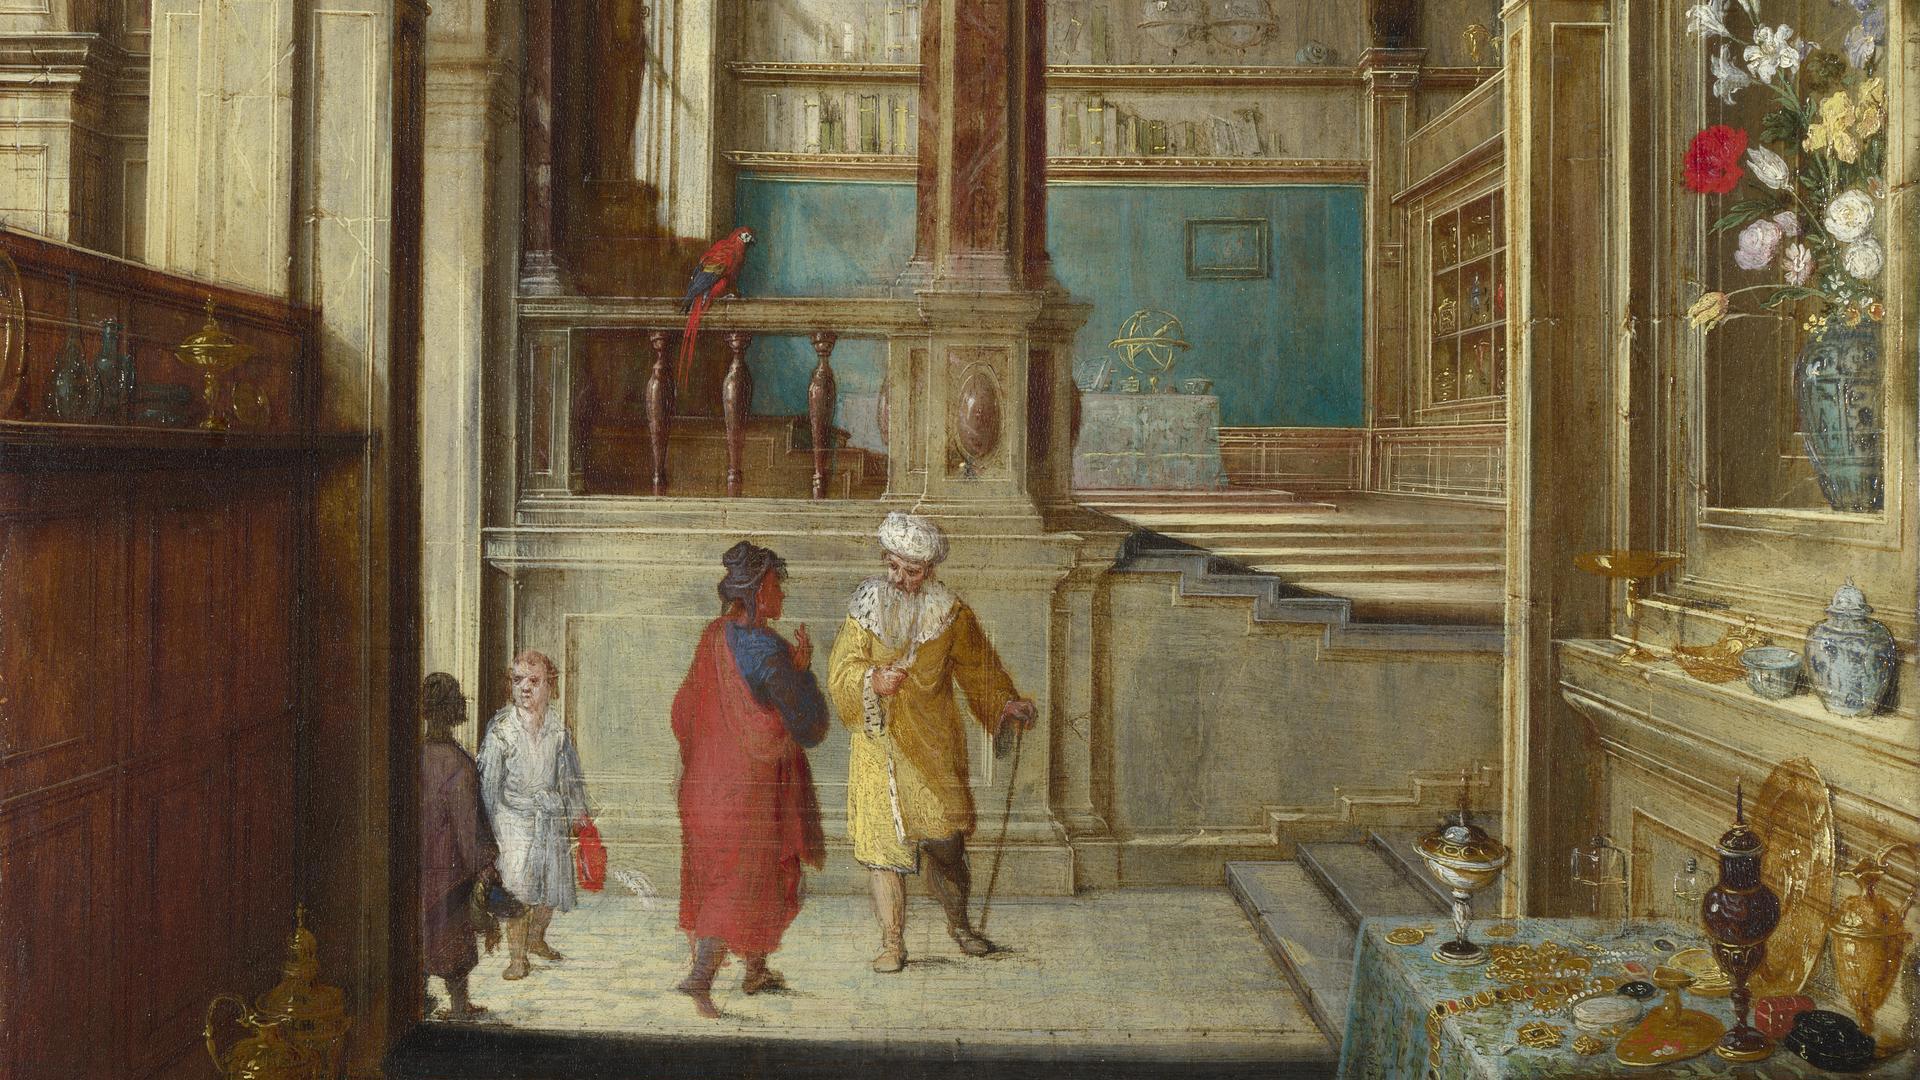 Croesus and Solon by Hendrick van Steenwyck the Younger and Follower of Jan Brueghel the Elder